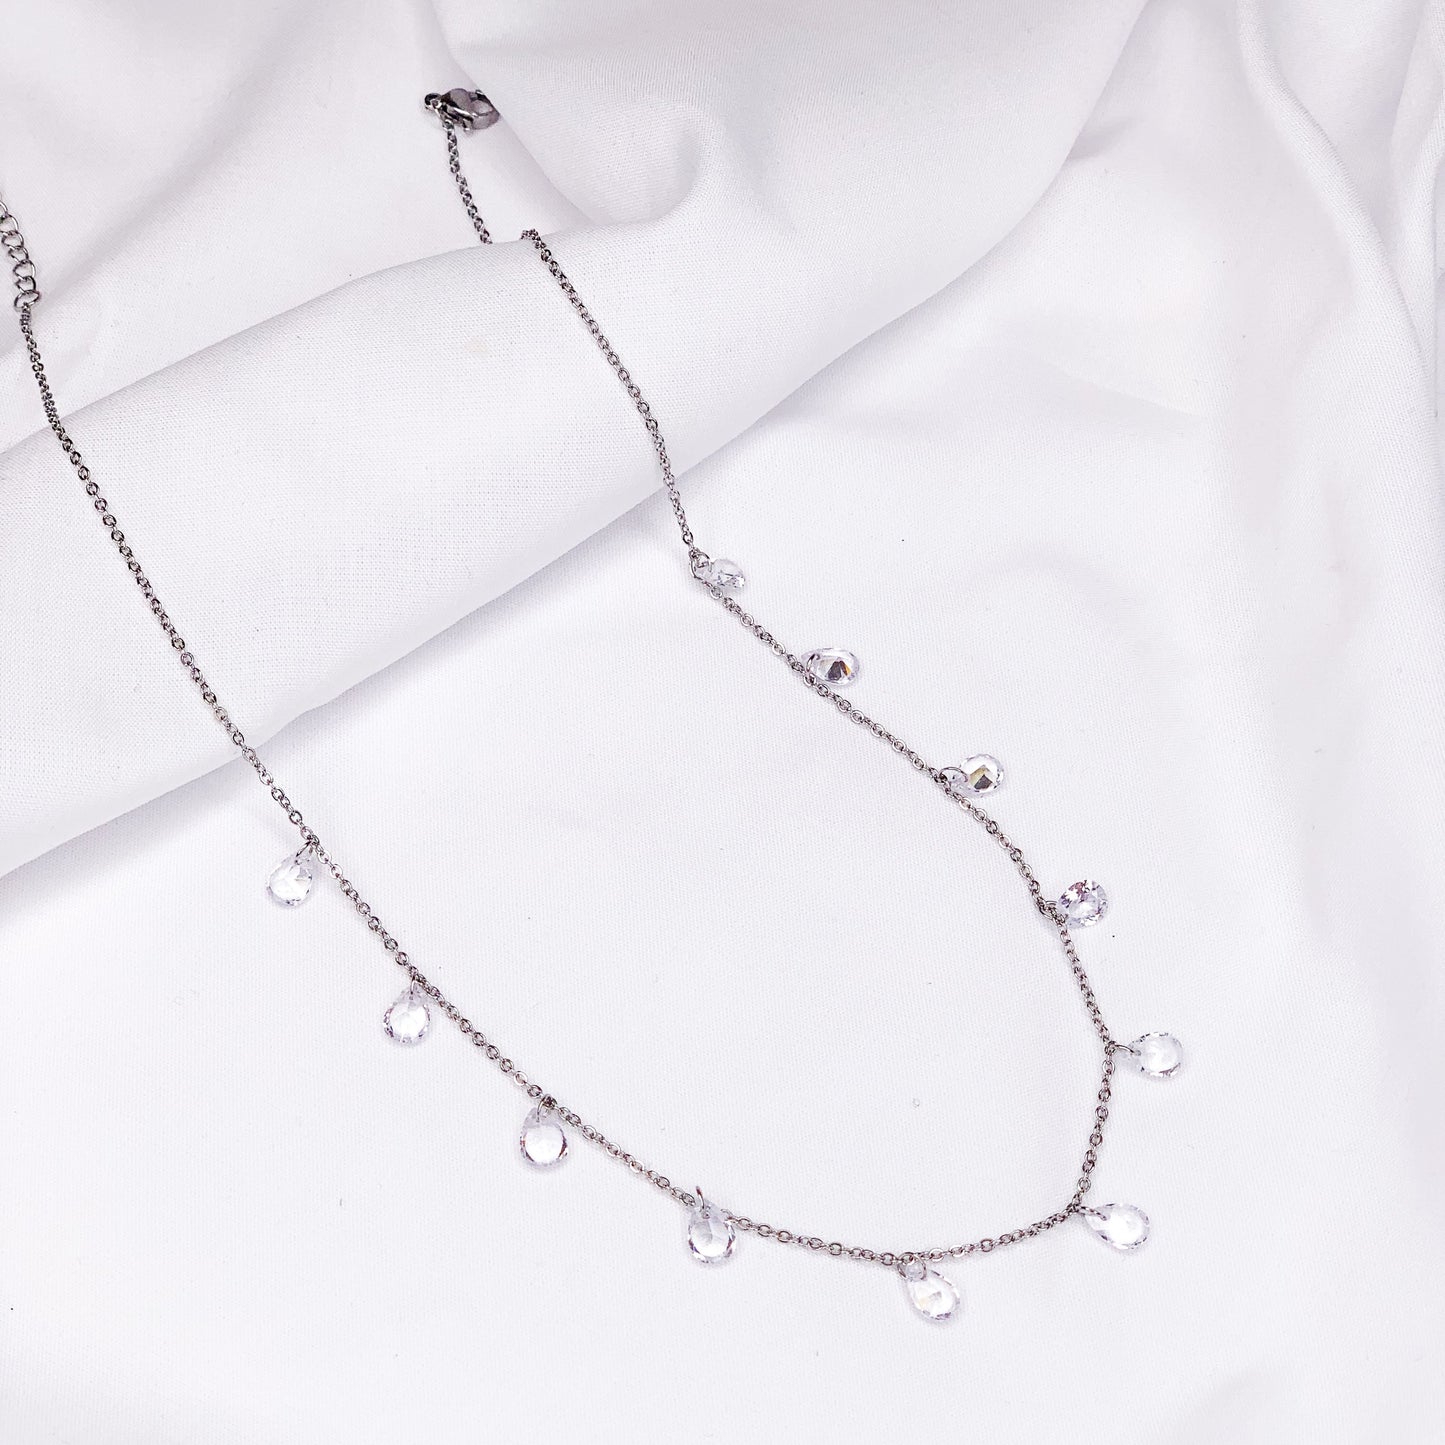 Chain crystal necklace